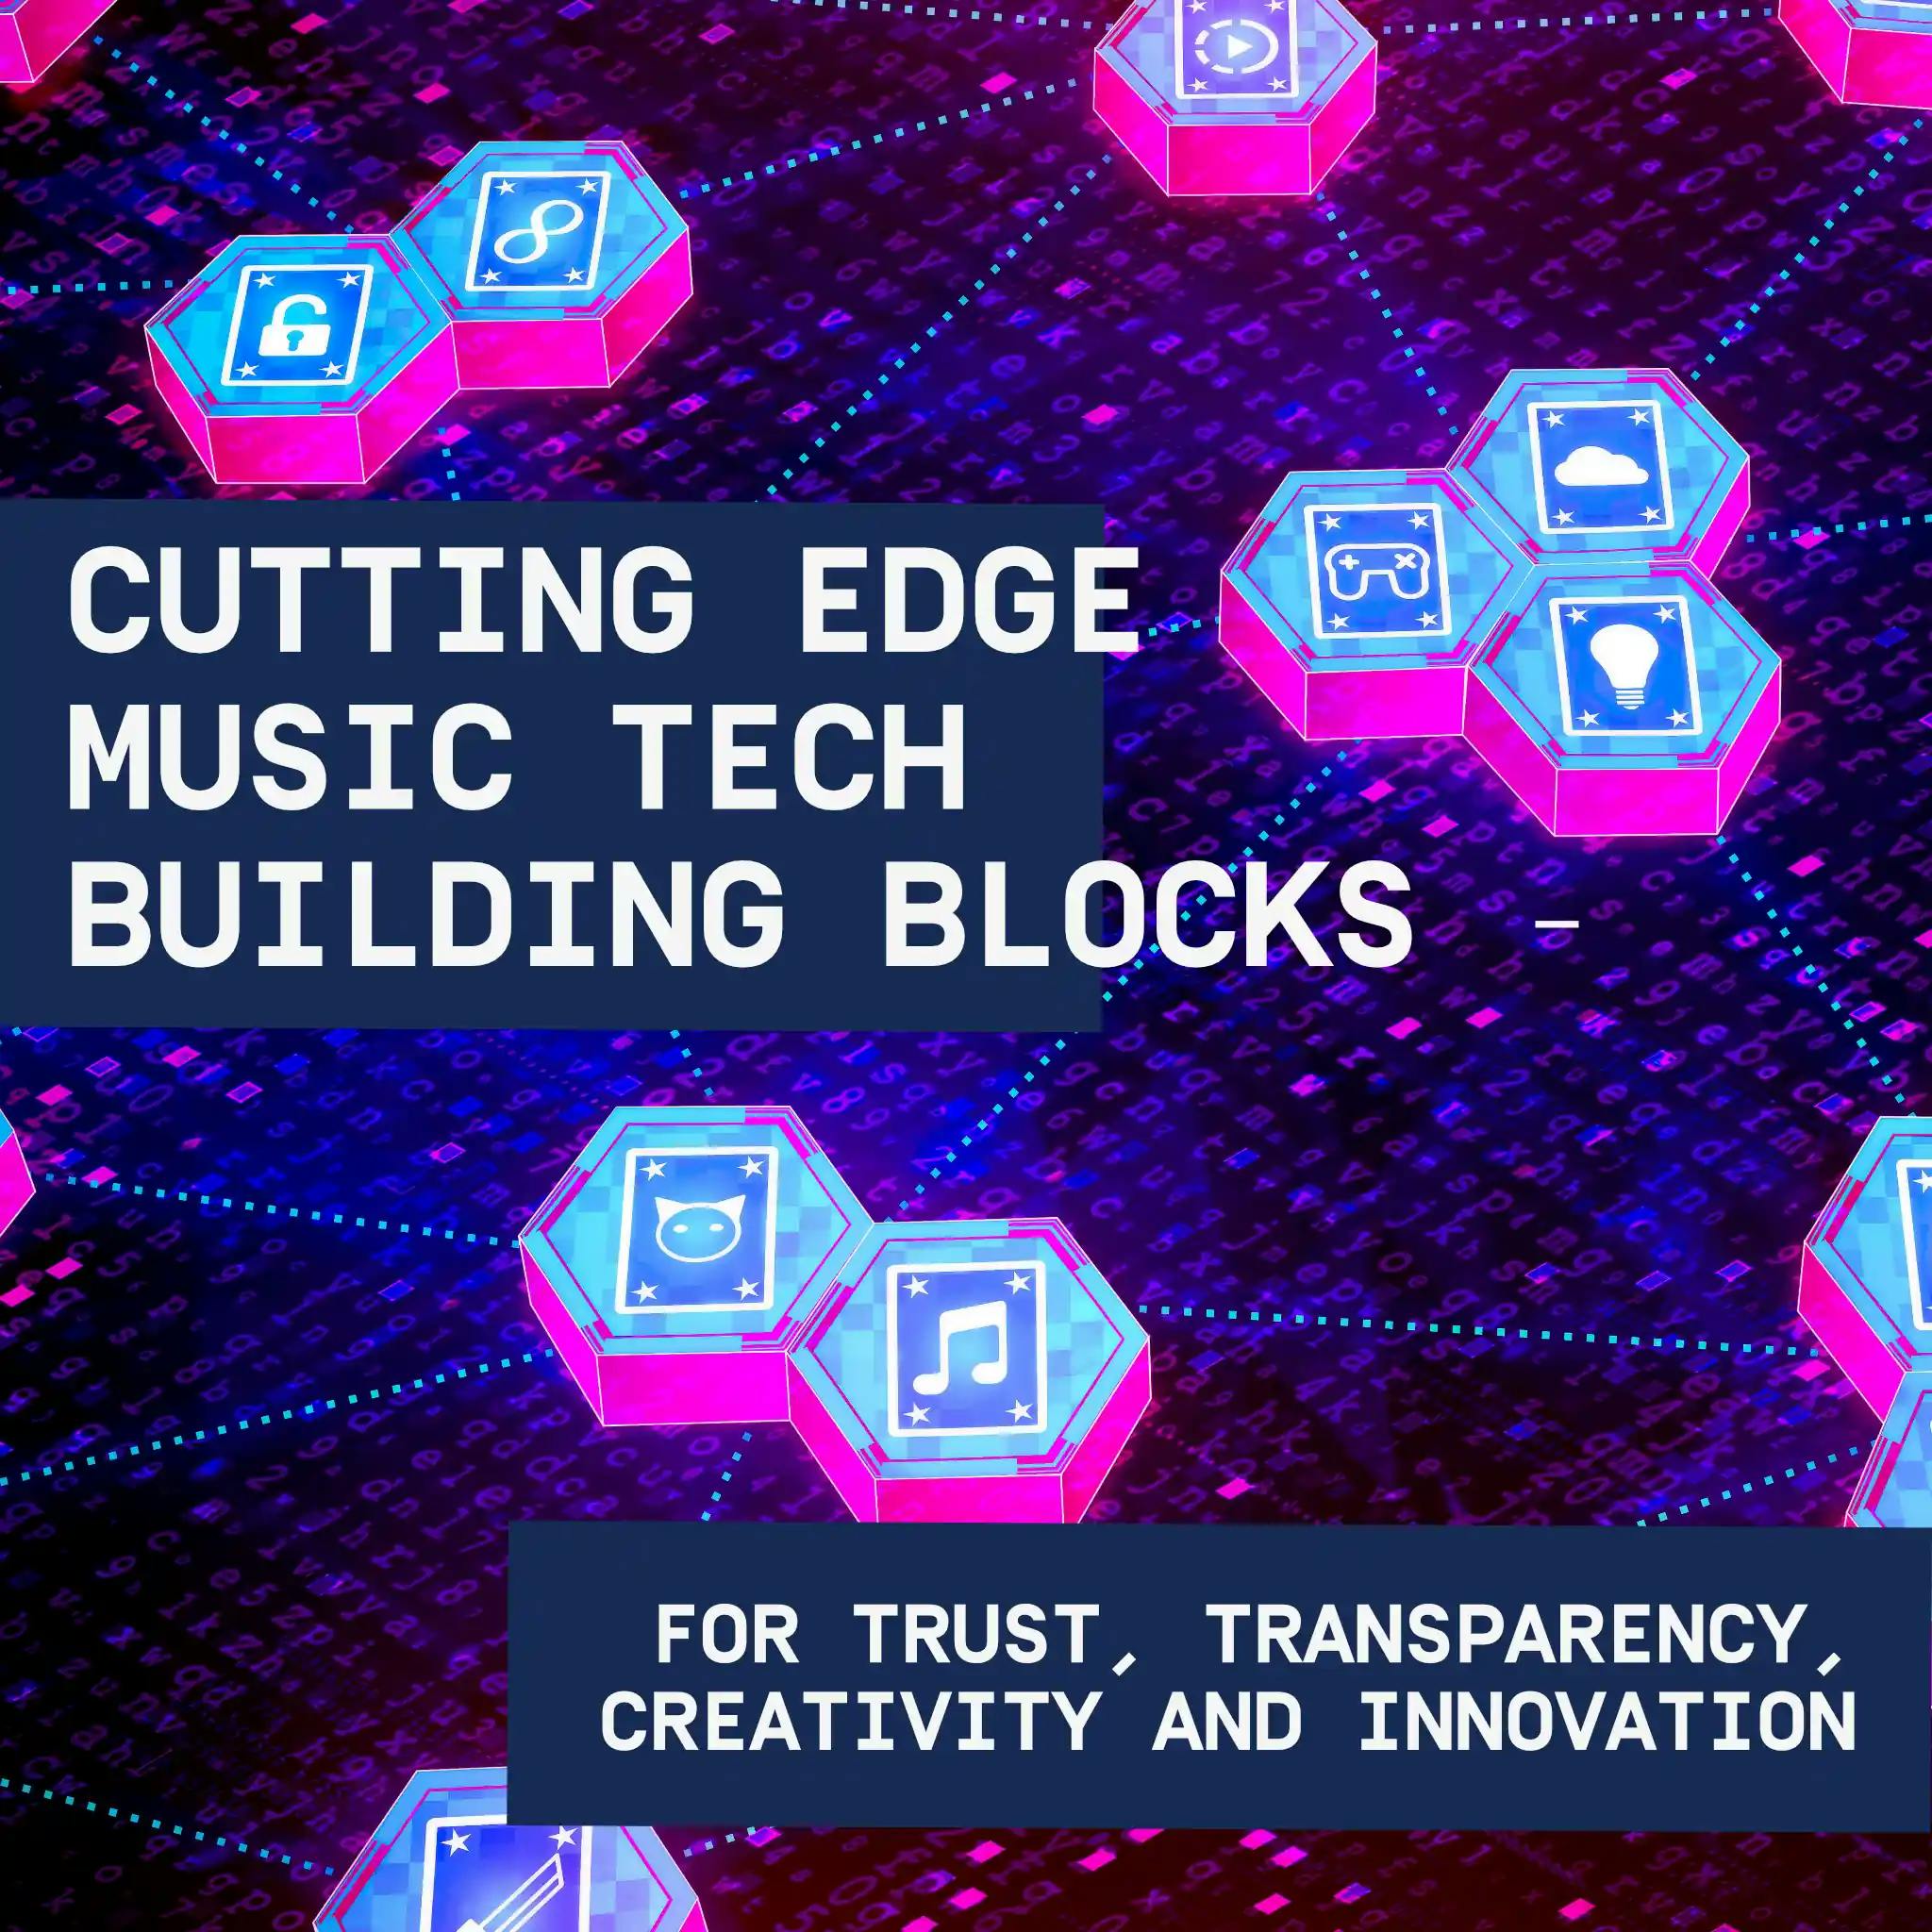 Cutting edge music tech building blocks for trust, transparency, creativity and innovation